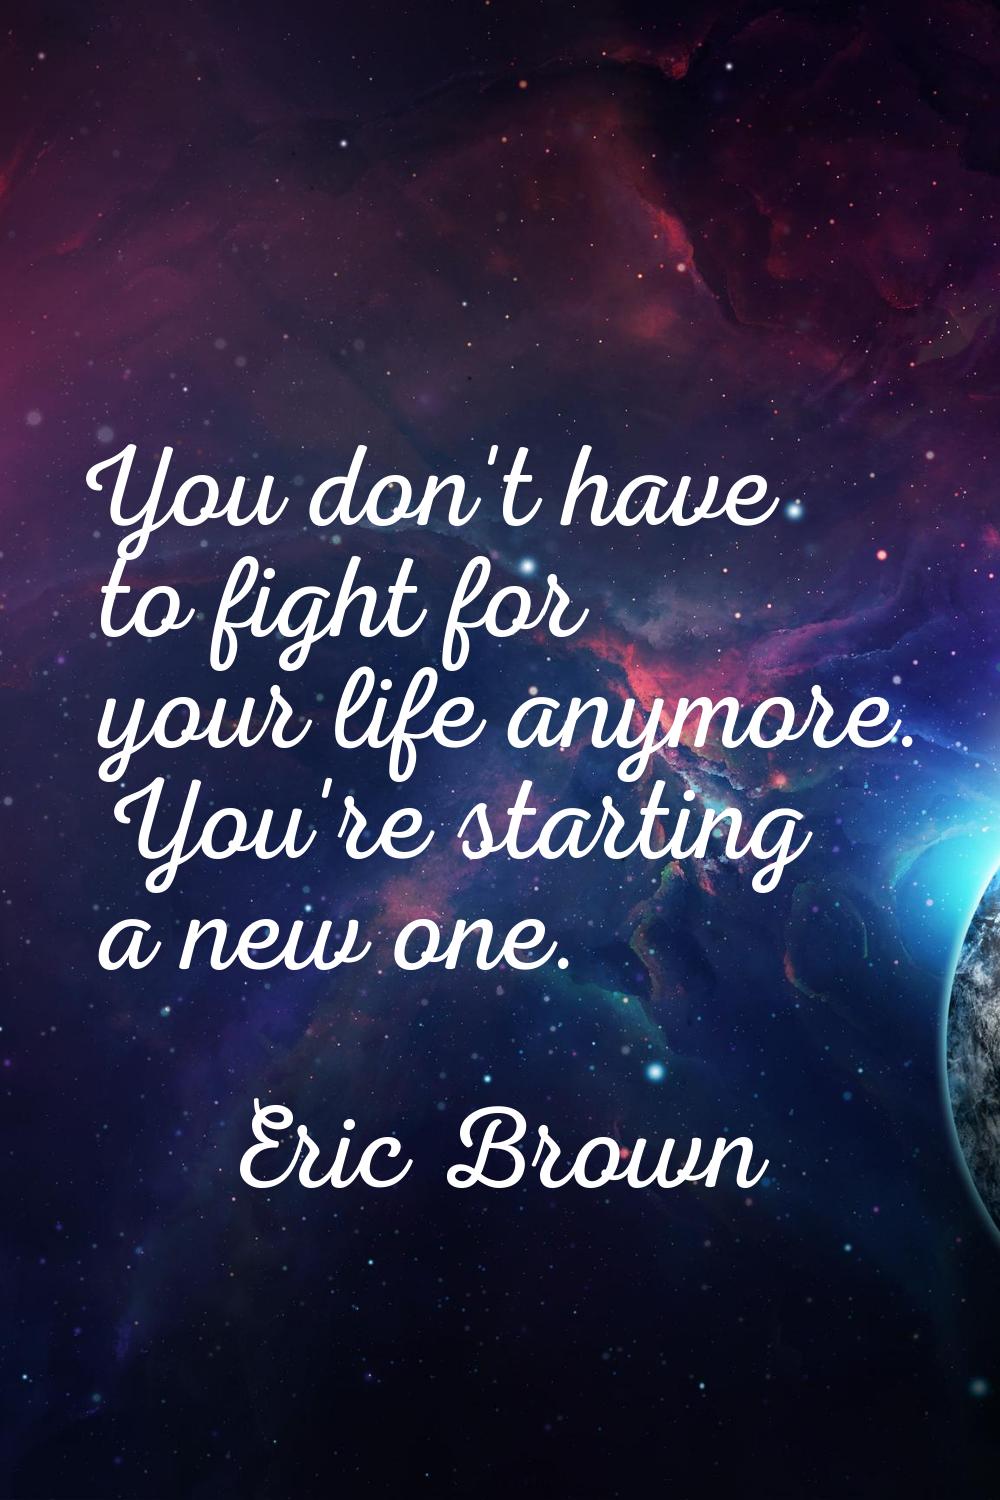 You don't have to fight for your life anymore. You're starting a new one.